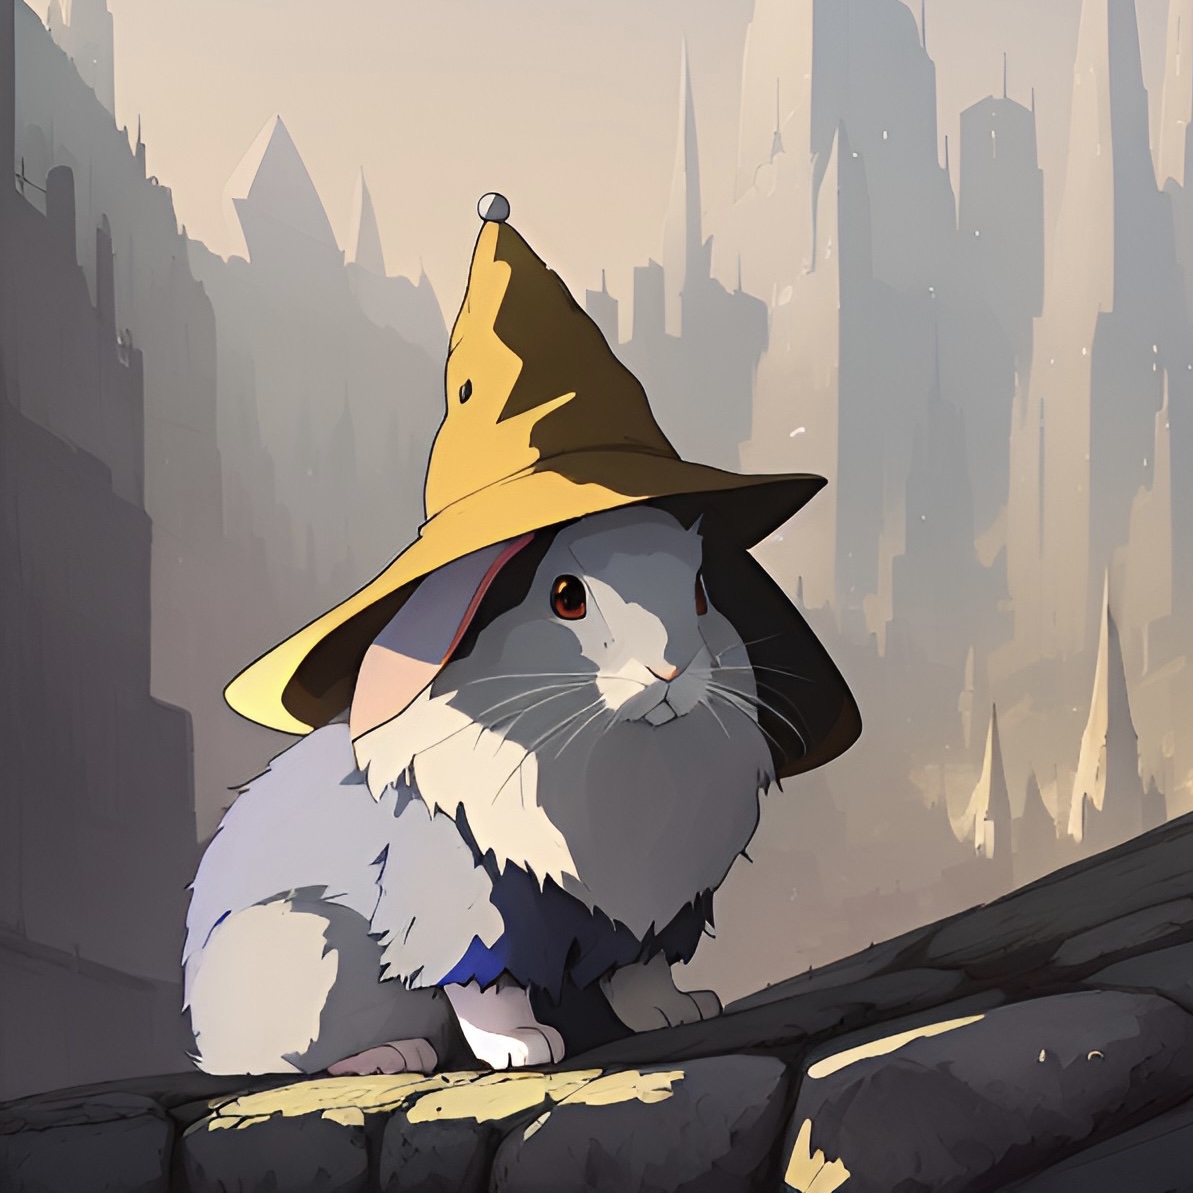 A rabbit with a wizard hat